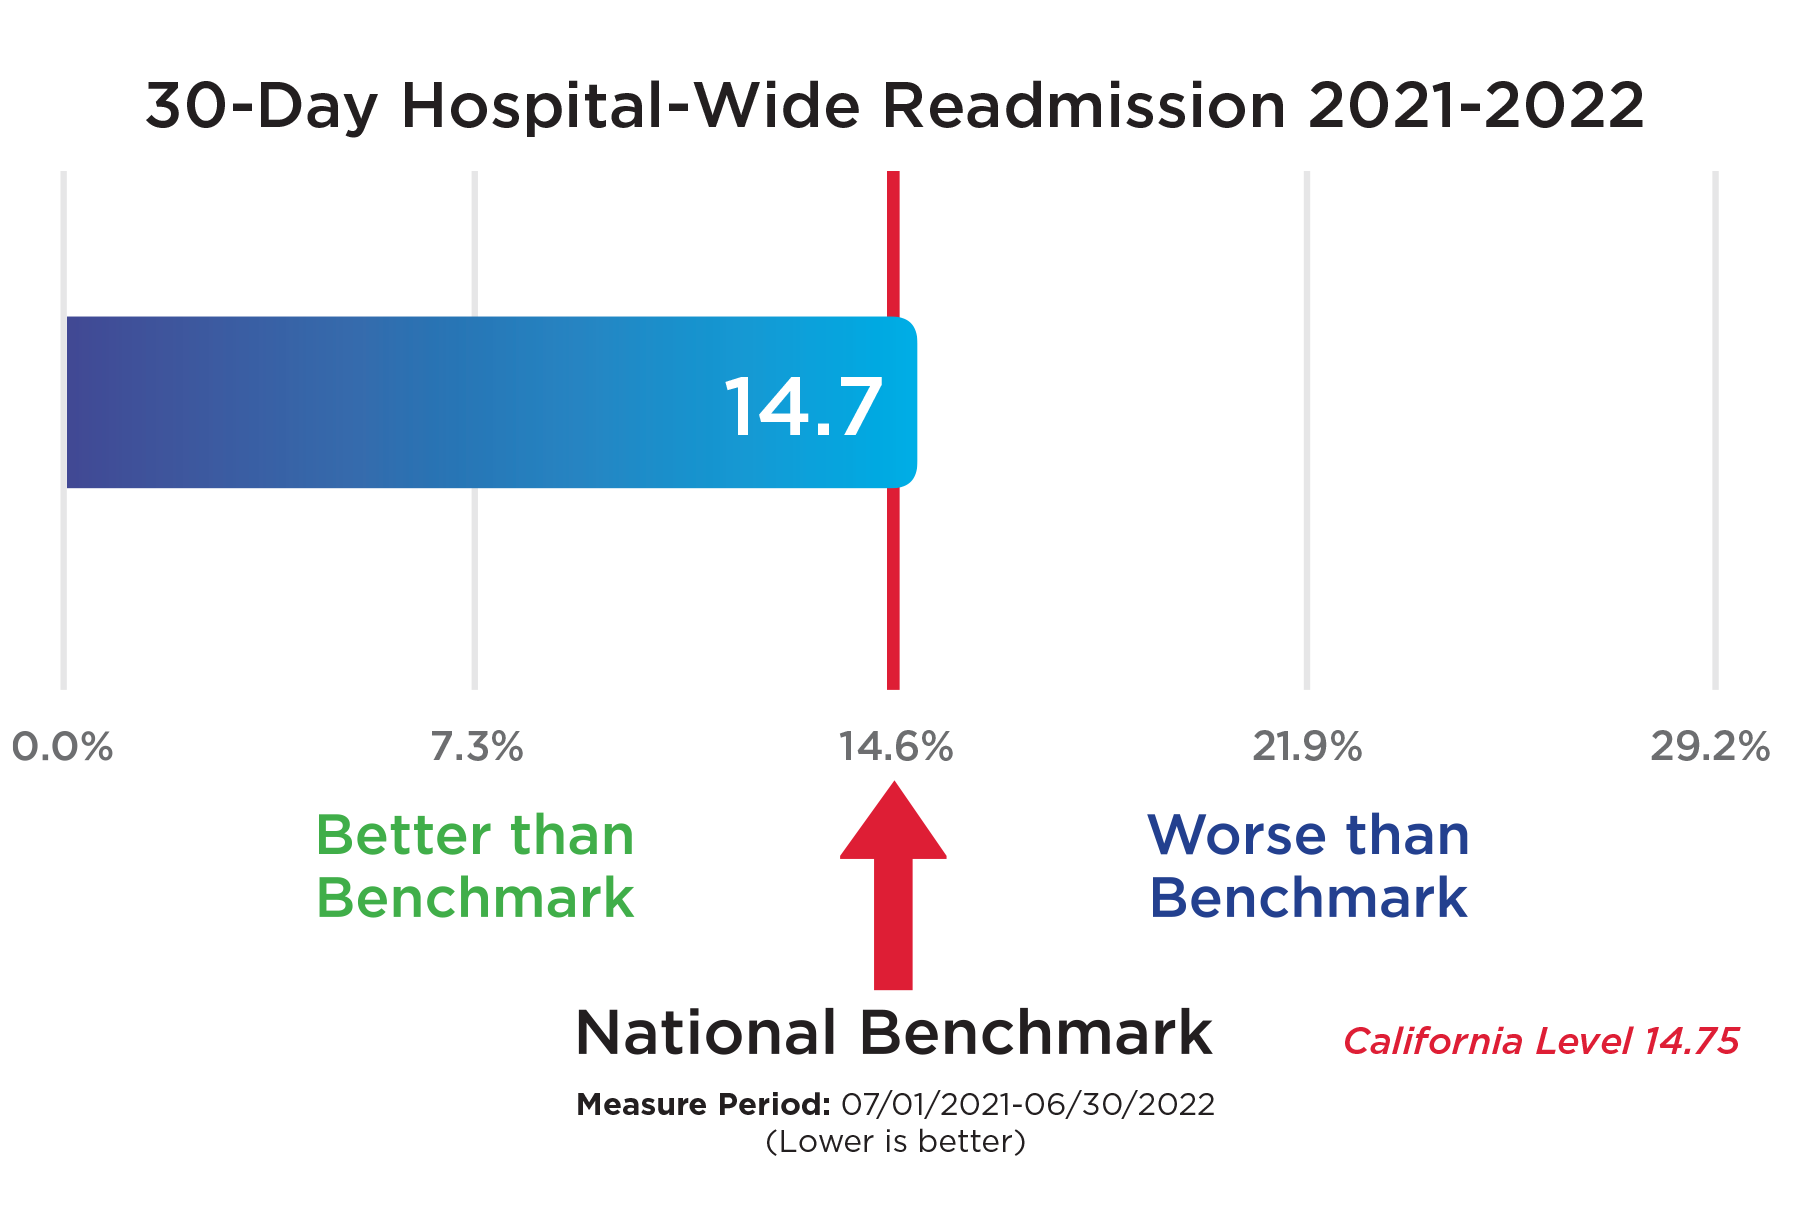 30-Day Hospital-Wide Readmission 2021-2022